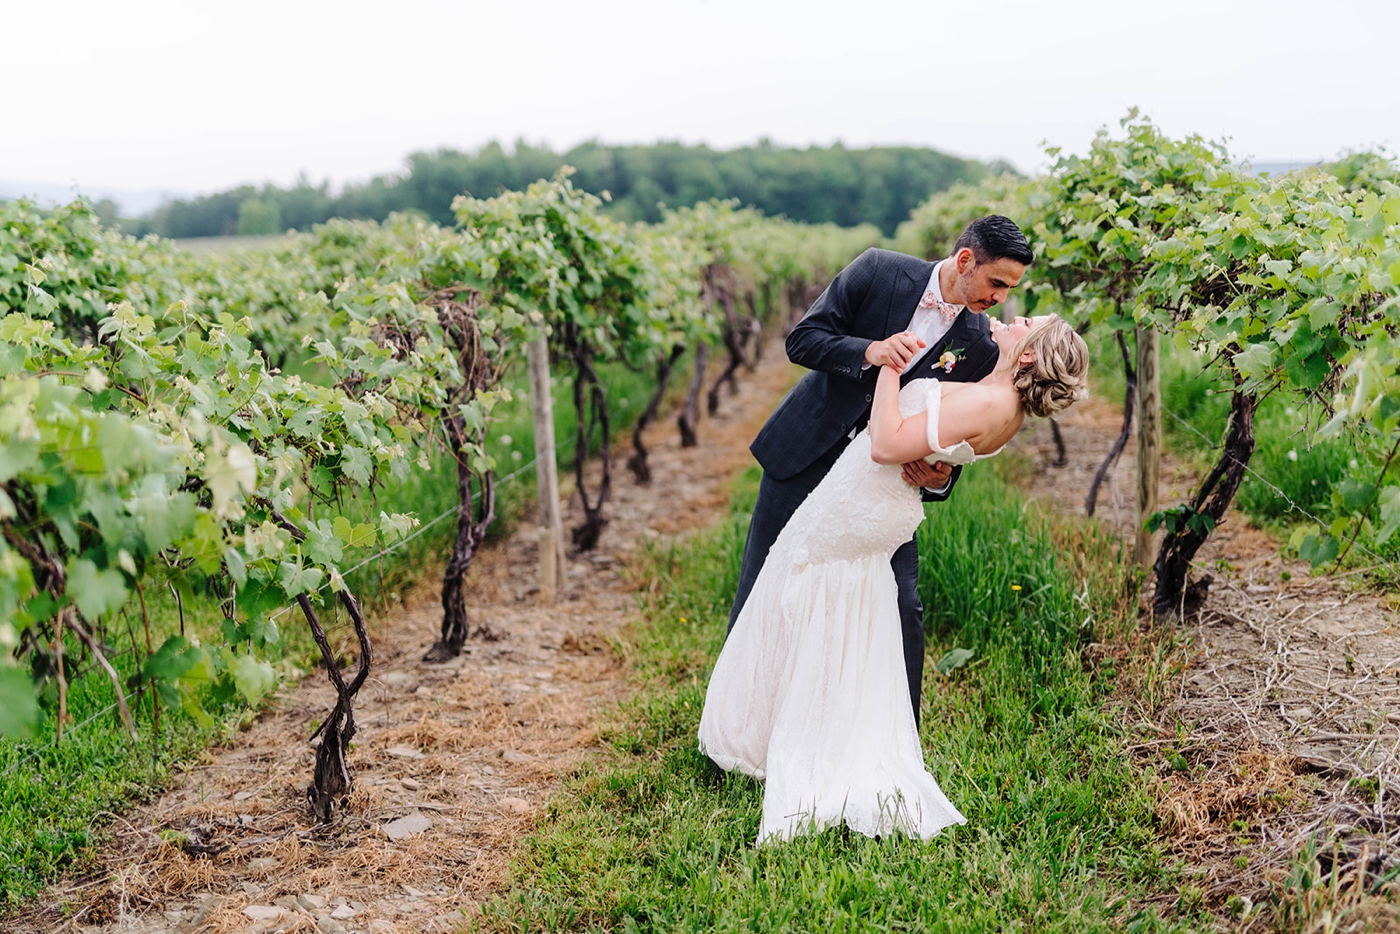 Wonder in Adagio - Finger Lakes Wedding Photography and Videography